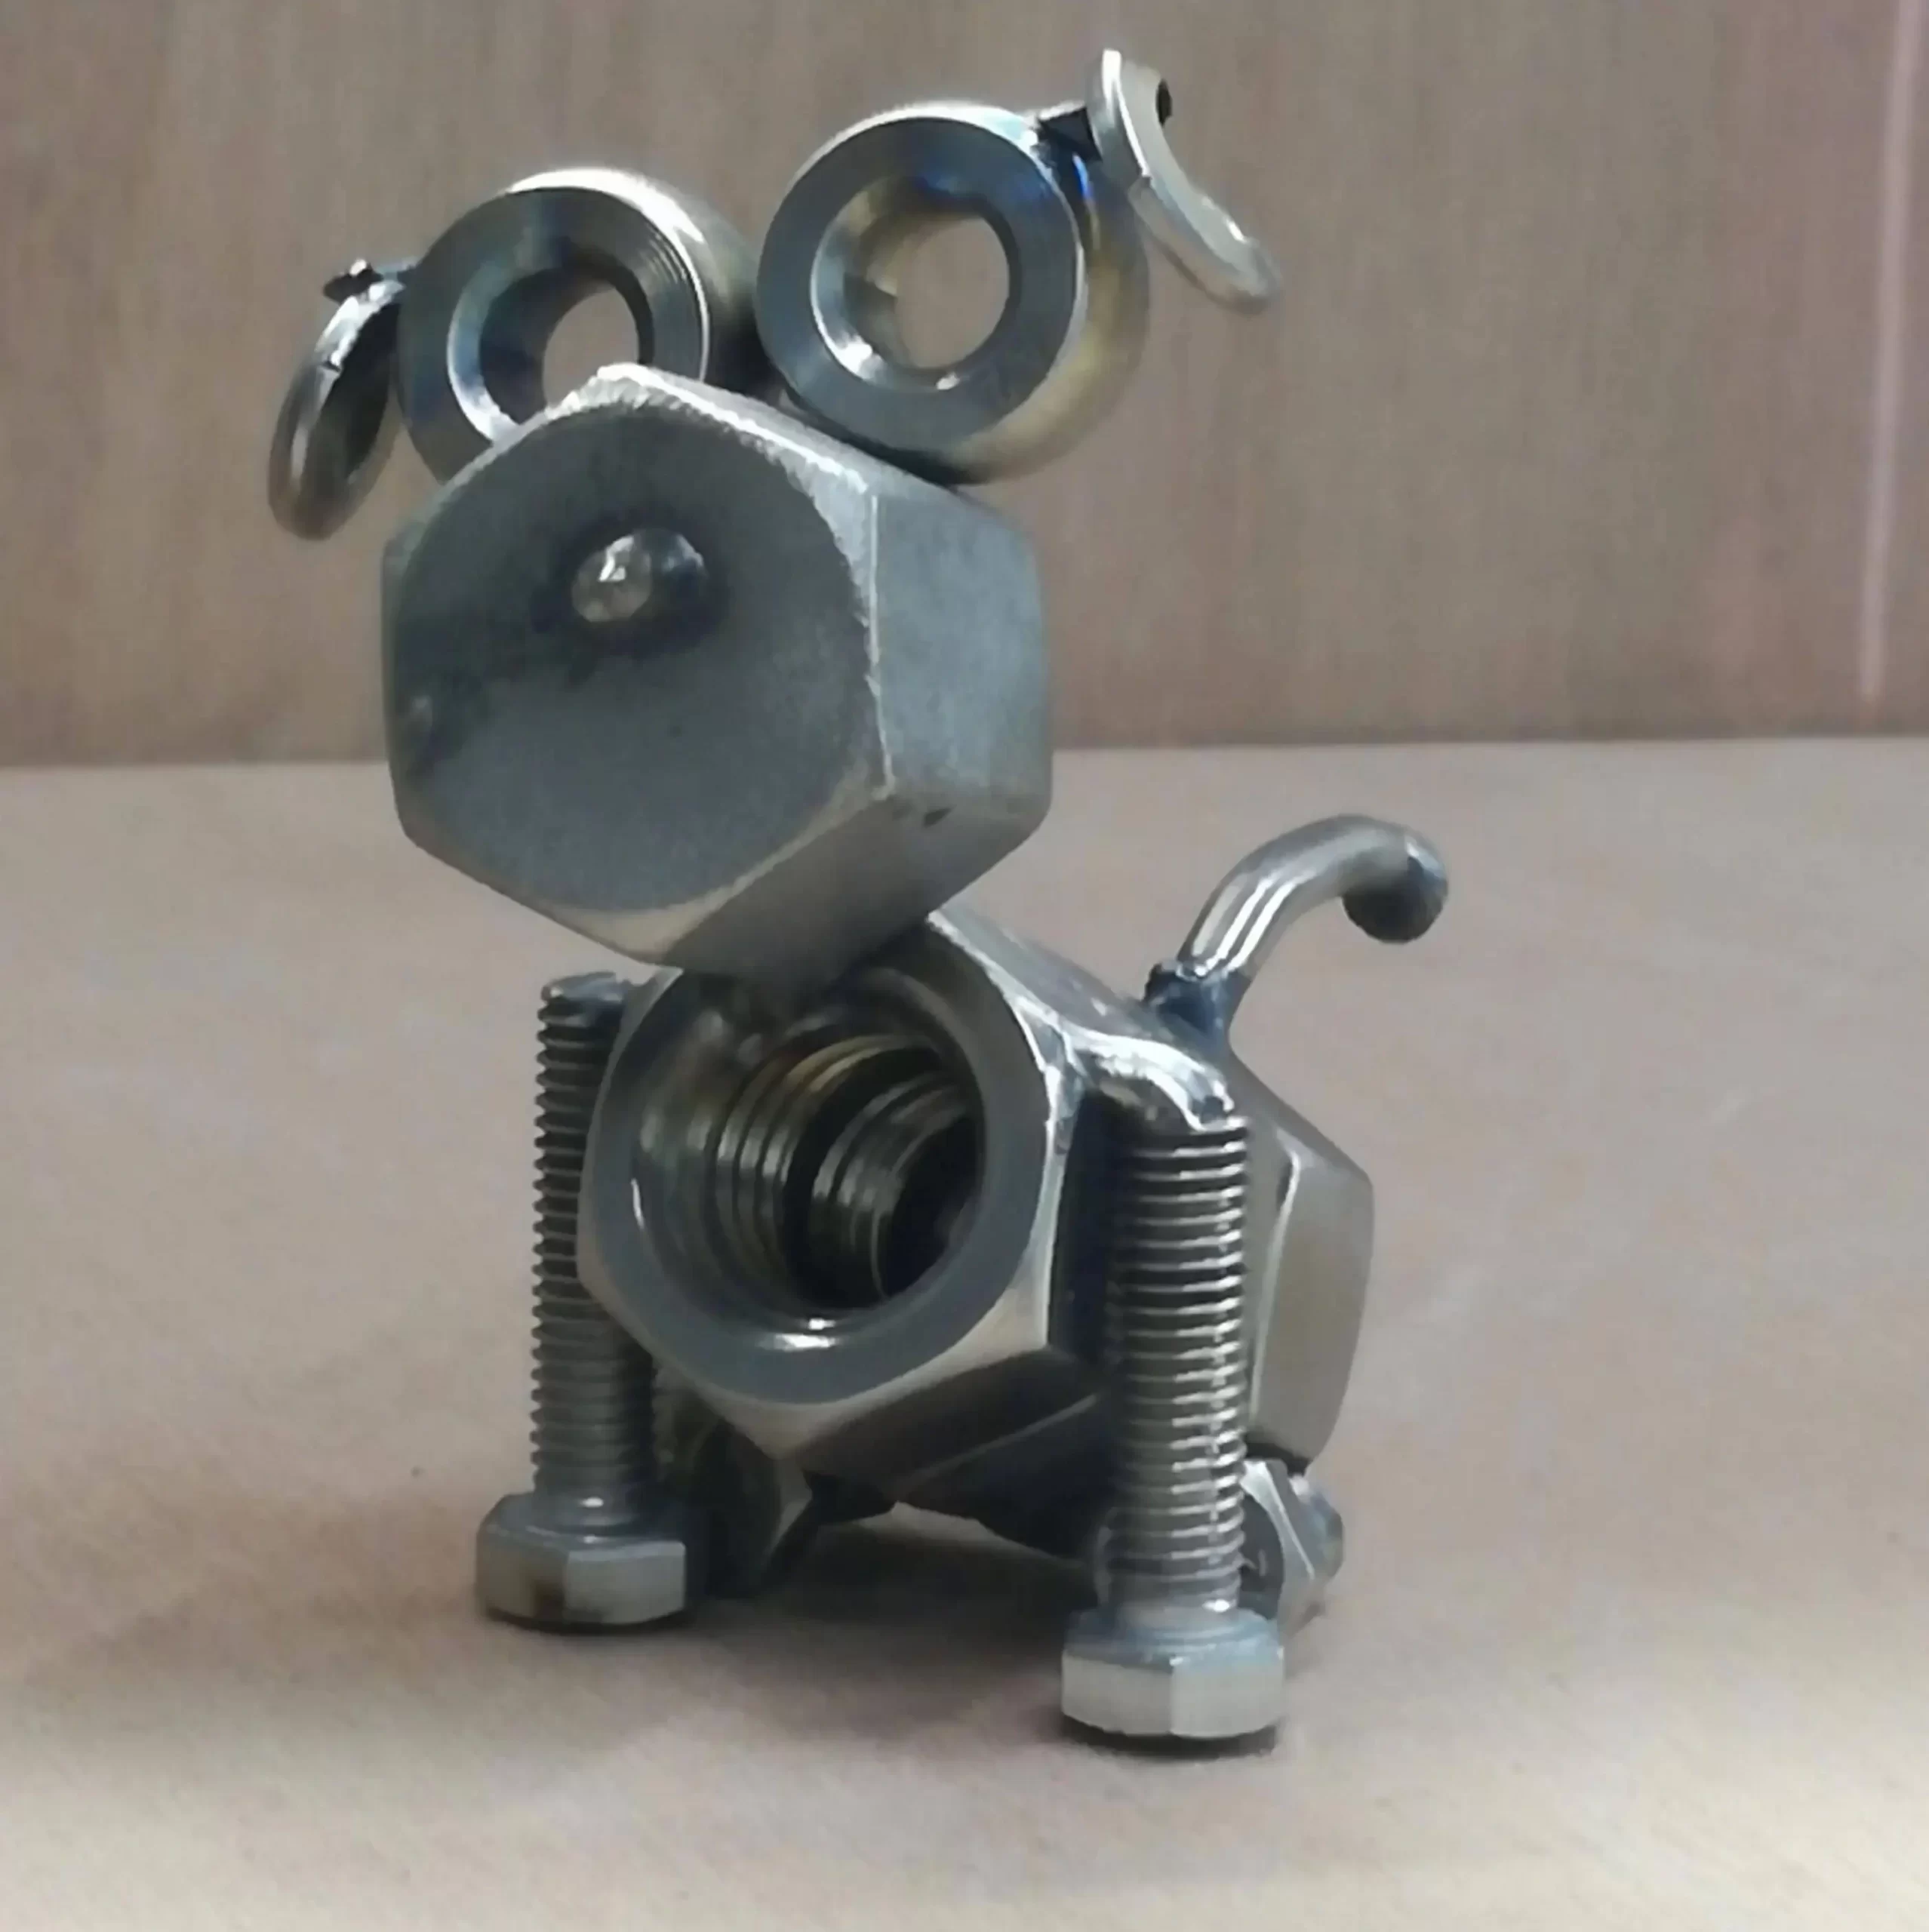 Metal welded sculpture of a dogo